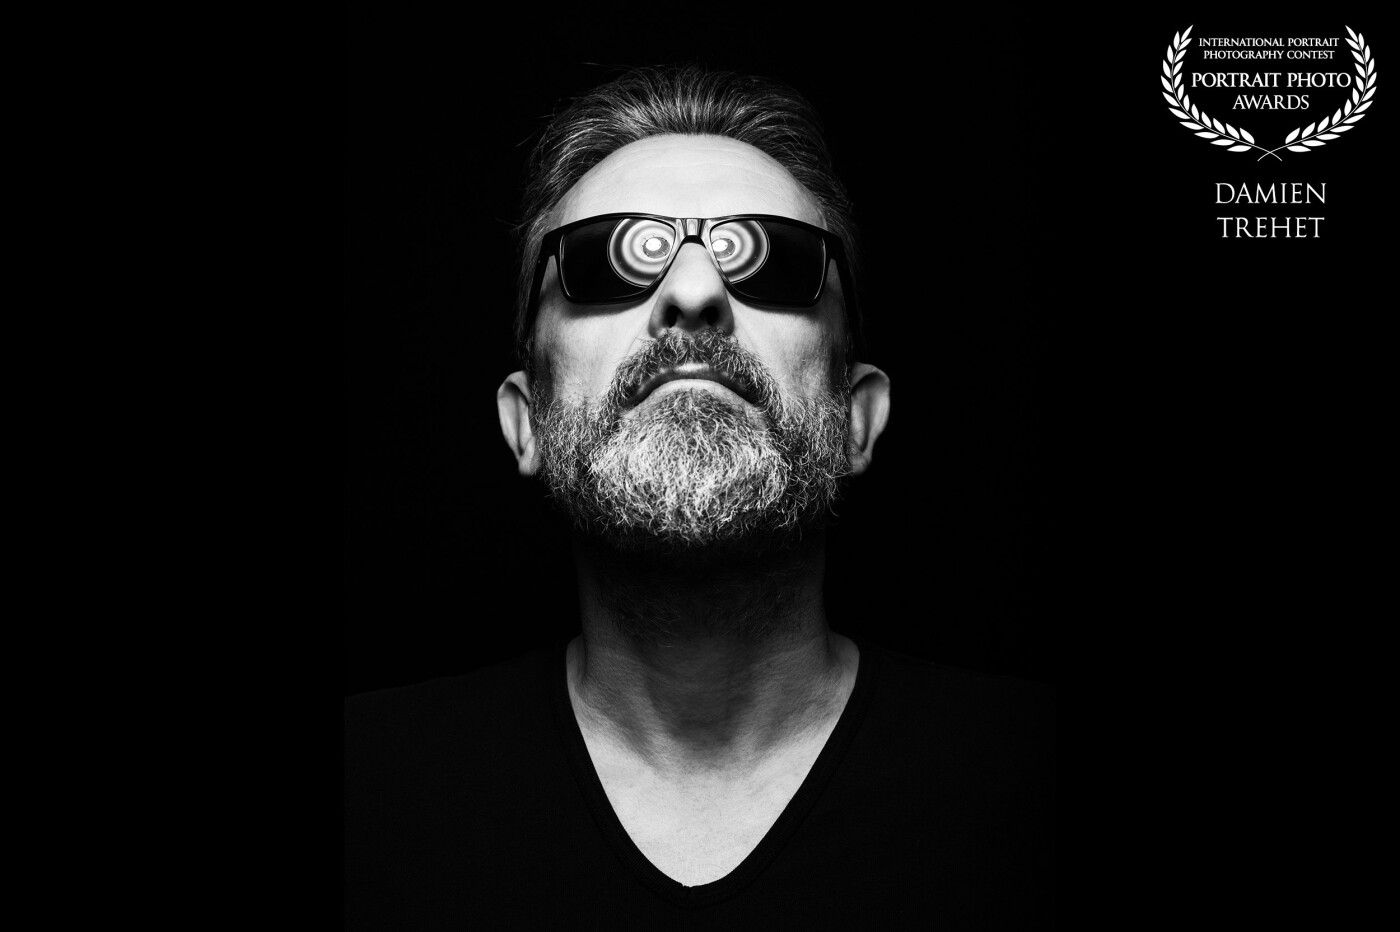 The Hypnotized Guy. <br />
I used the reflection of a beauty dish on the sunglasses to replace the eyes.  The beauty dish used is a demi Mola to have this effect of multiple concentric circles.